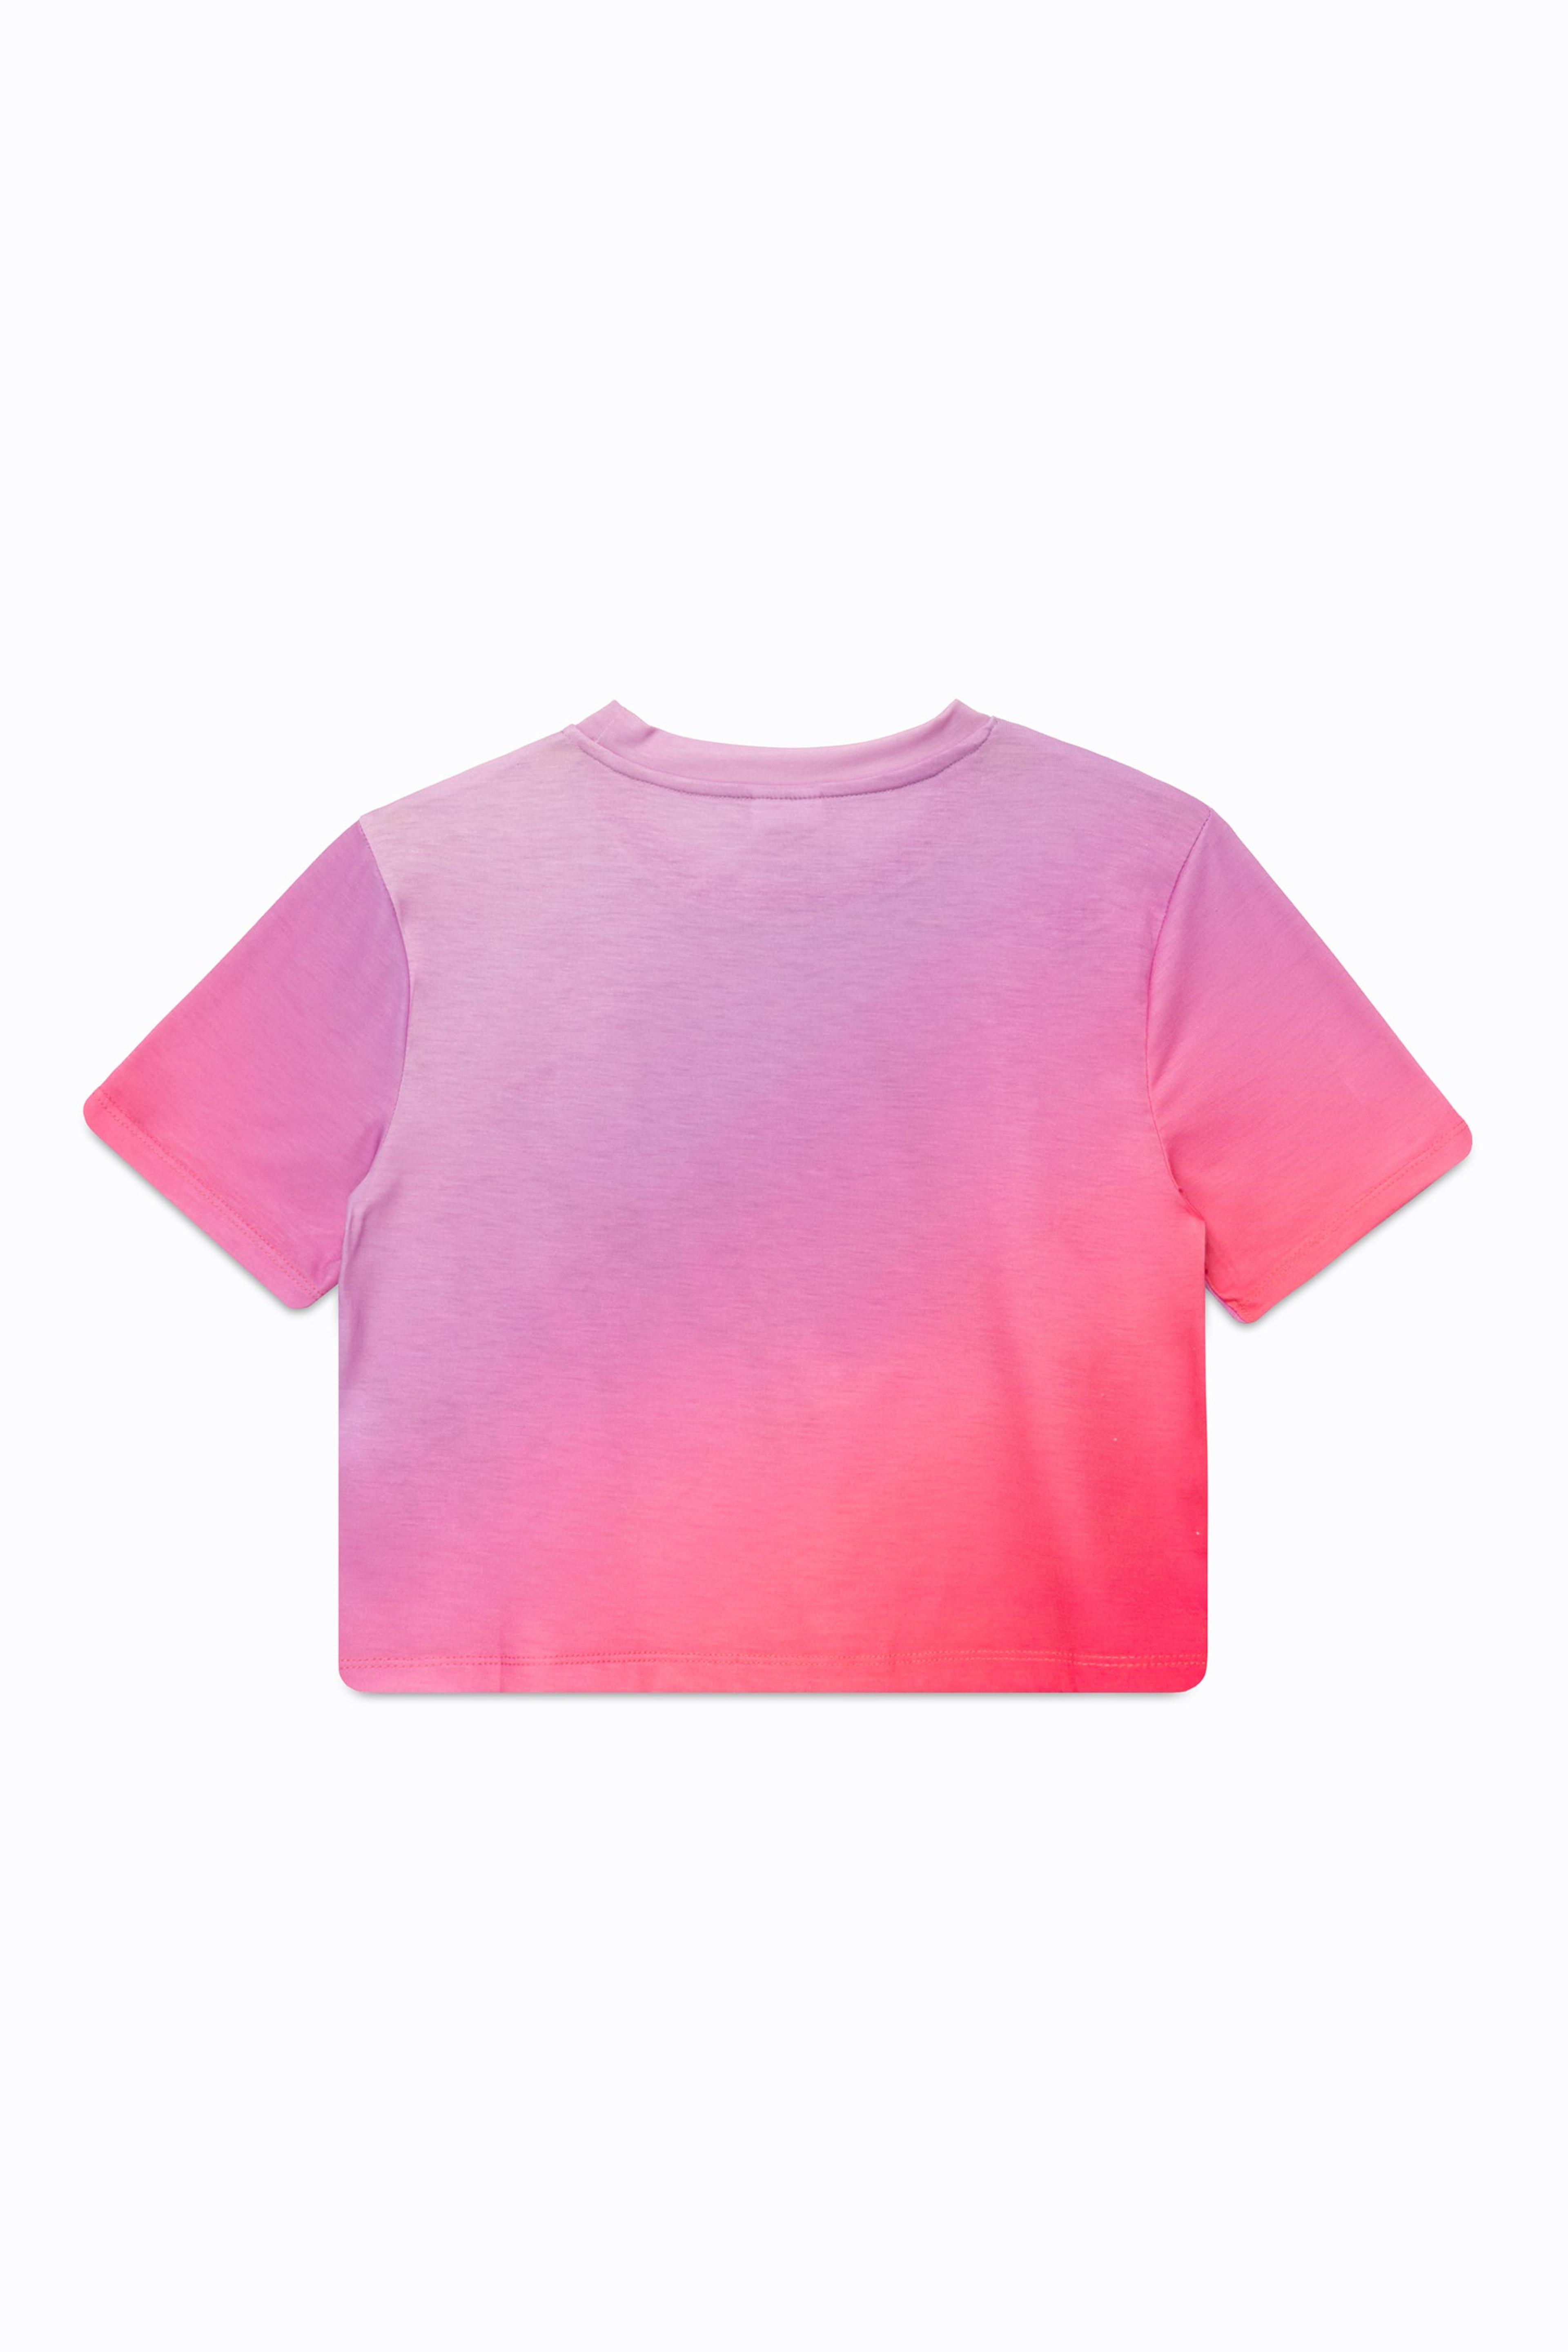 Alternate View 7 of HYPE GIRLS PINK FADE HOLOGRAPHIC SCRIPT CROPPED T-SHIRT